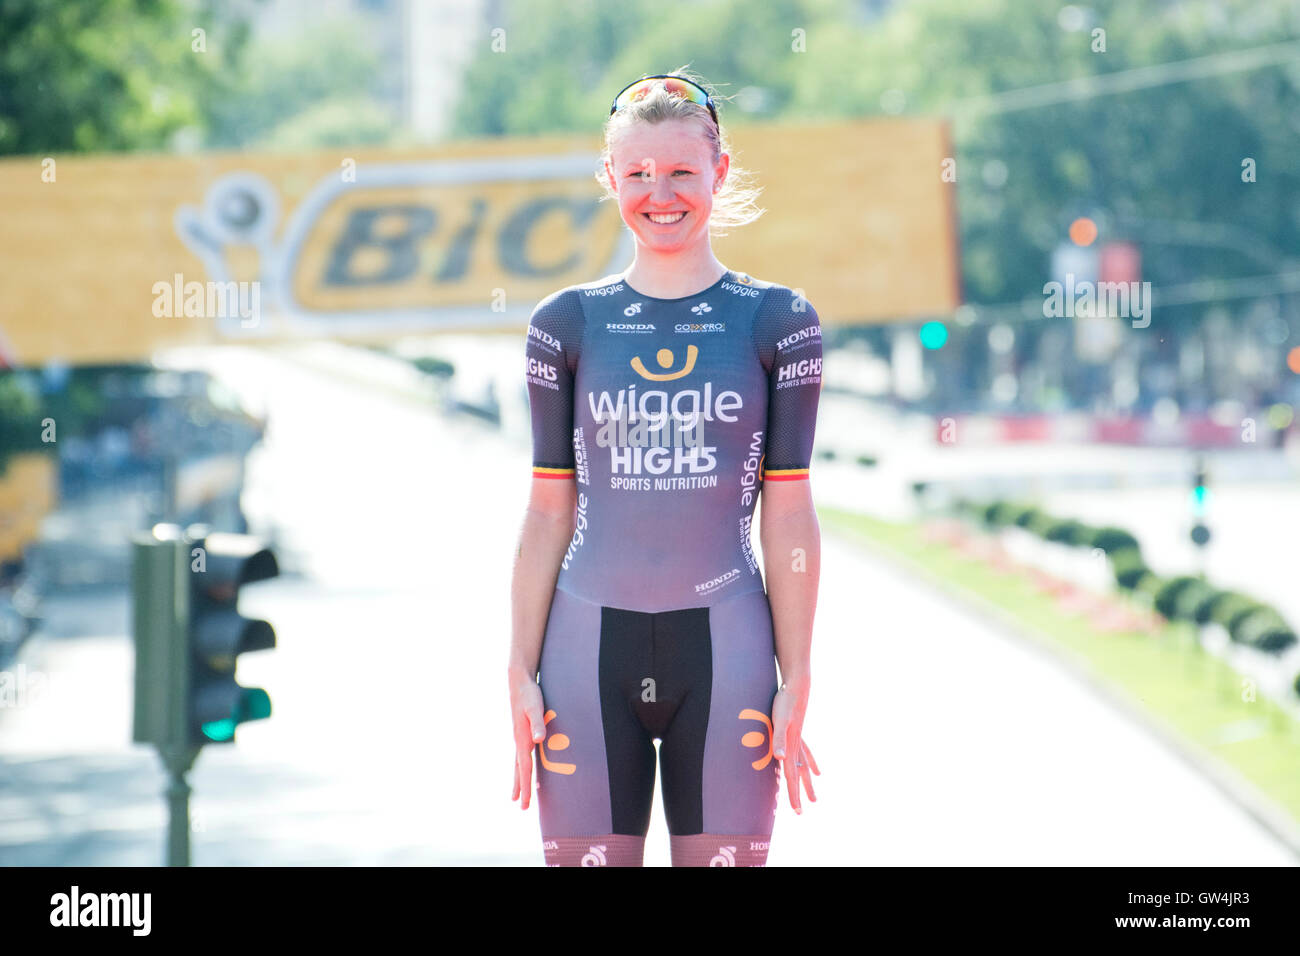 Madrid, Spain. 11th September, 2016. Mia Radotic (Wiggle High5) at the podium of the one-day race of UCI Women's World Tour ‘Madrid Challenge’ on 11 September, 2016 in Madrid, Spain. Credit: David Gato/Alamy Live News Stock Photo